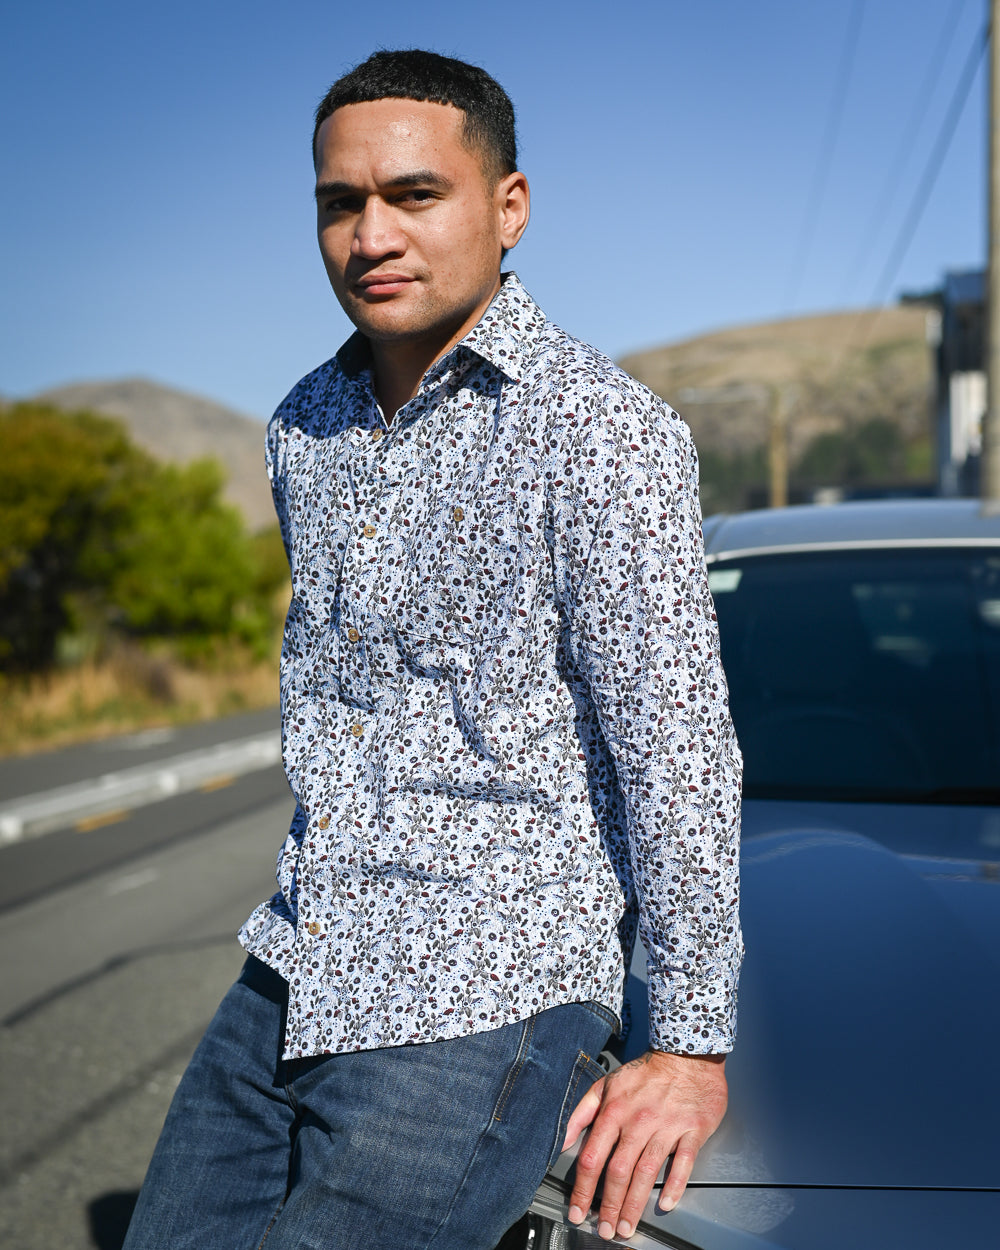 Handsome young man sitting on car bonnet wearing long-sleeve floral shirt